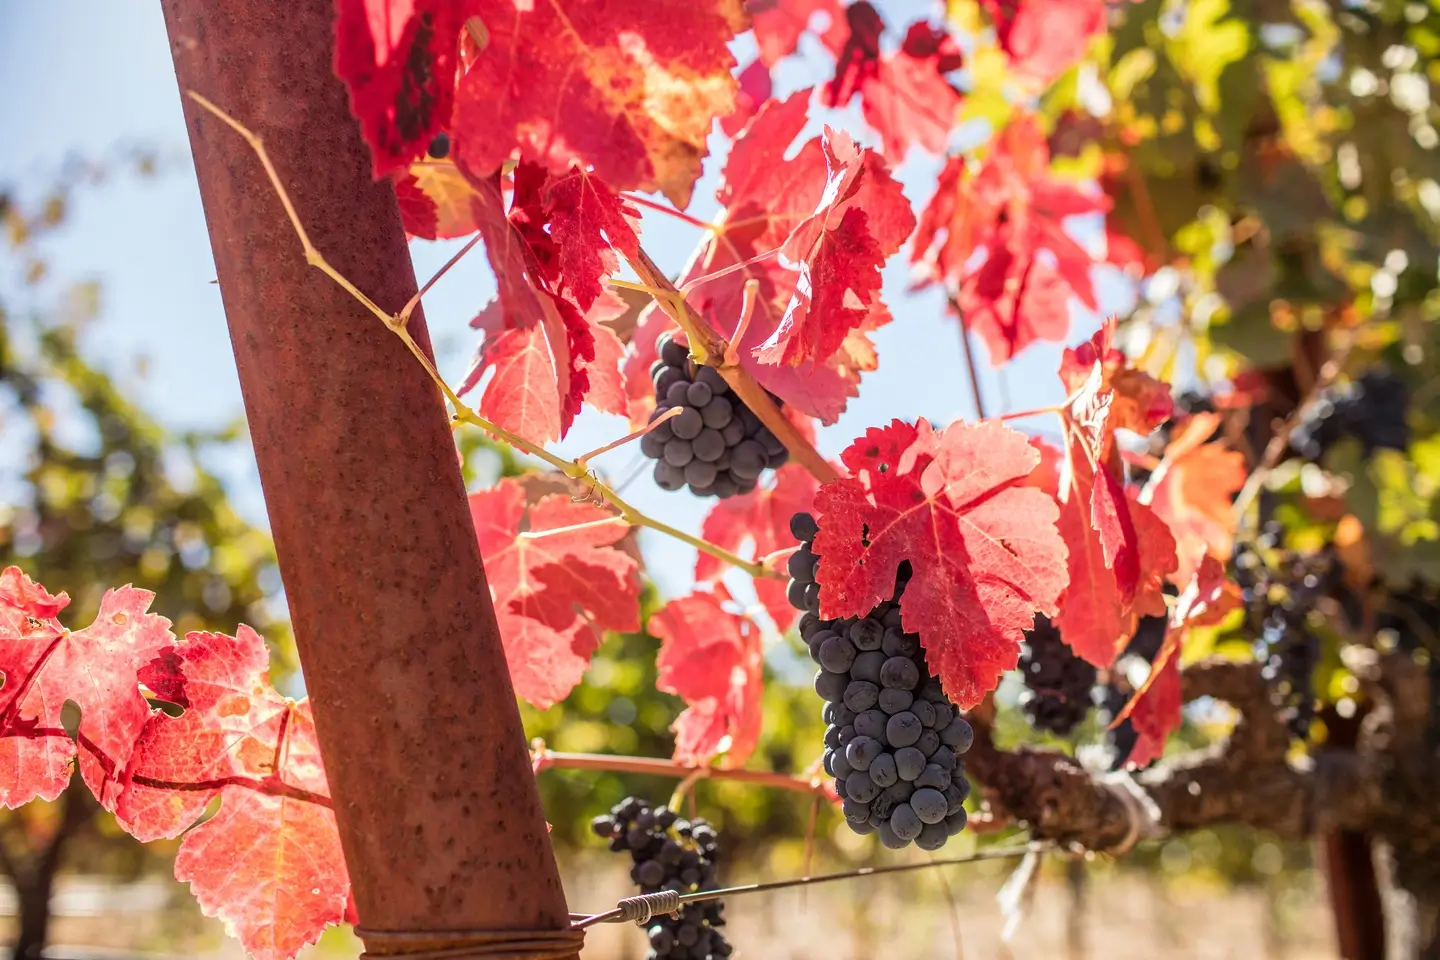 Red grape clusters in vineyard in autumn time